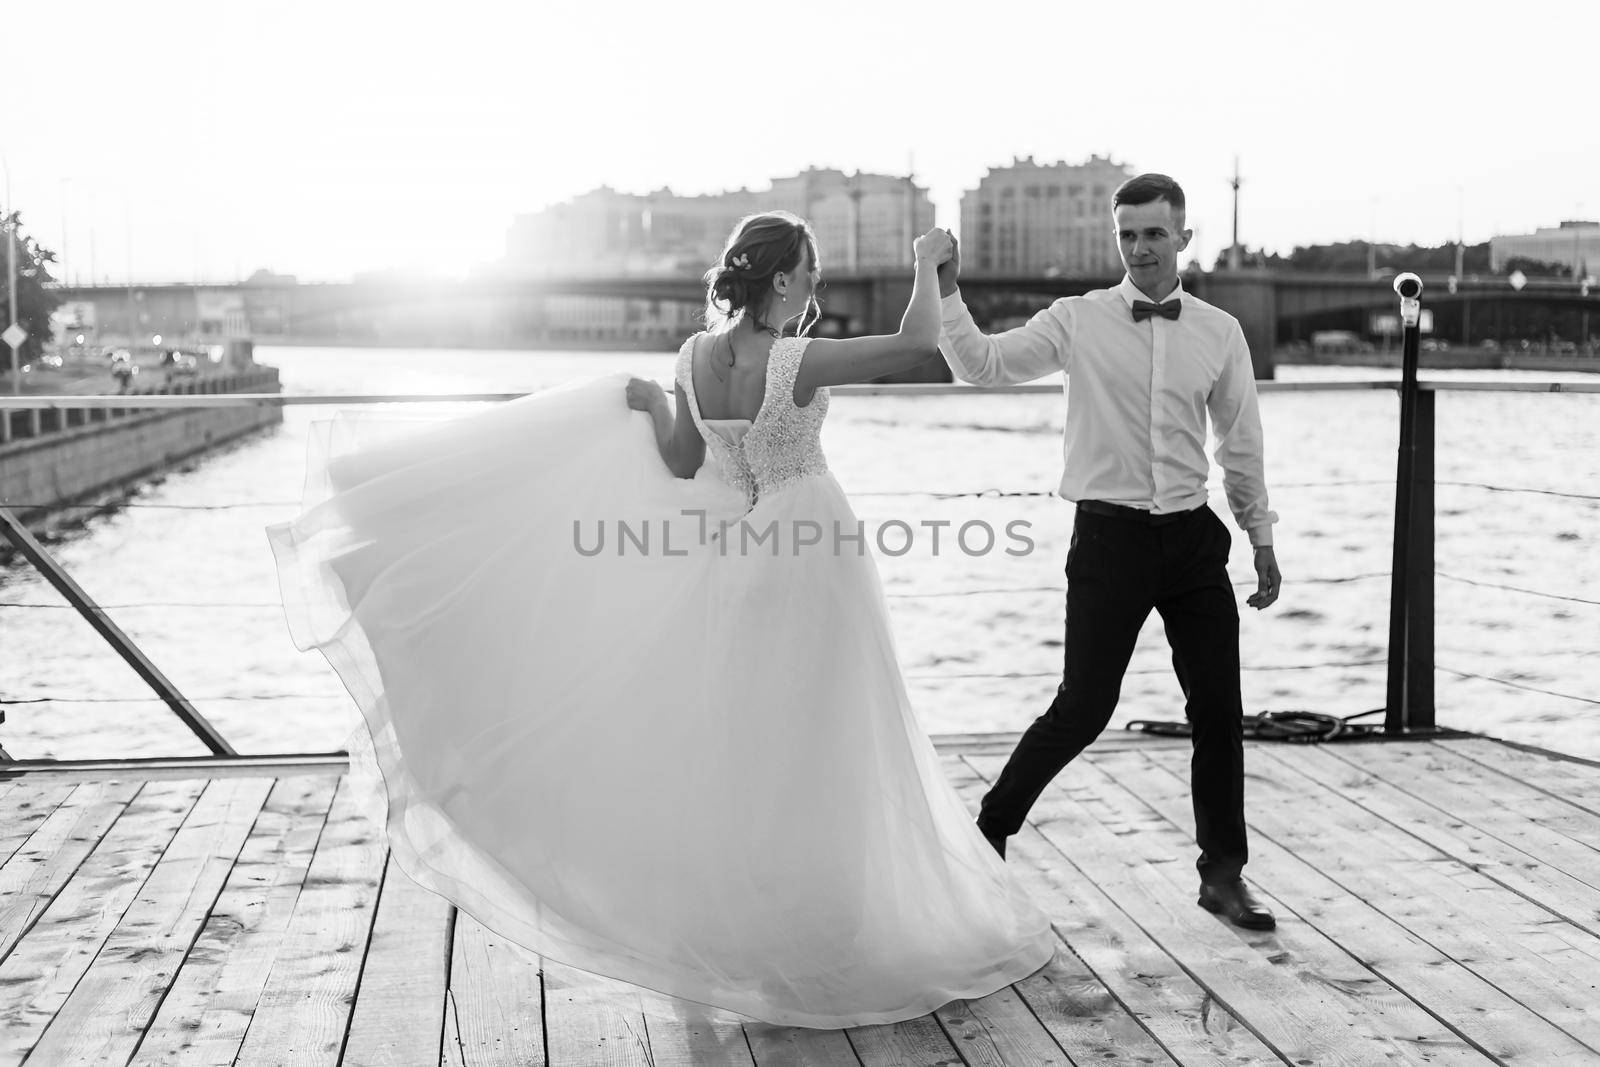 The dance of the bride and groom. Wedding article. A happy couple. Love. Photos for printed products. Romance